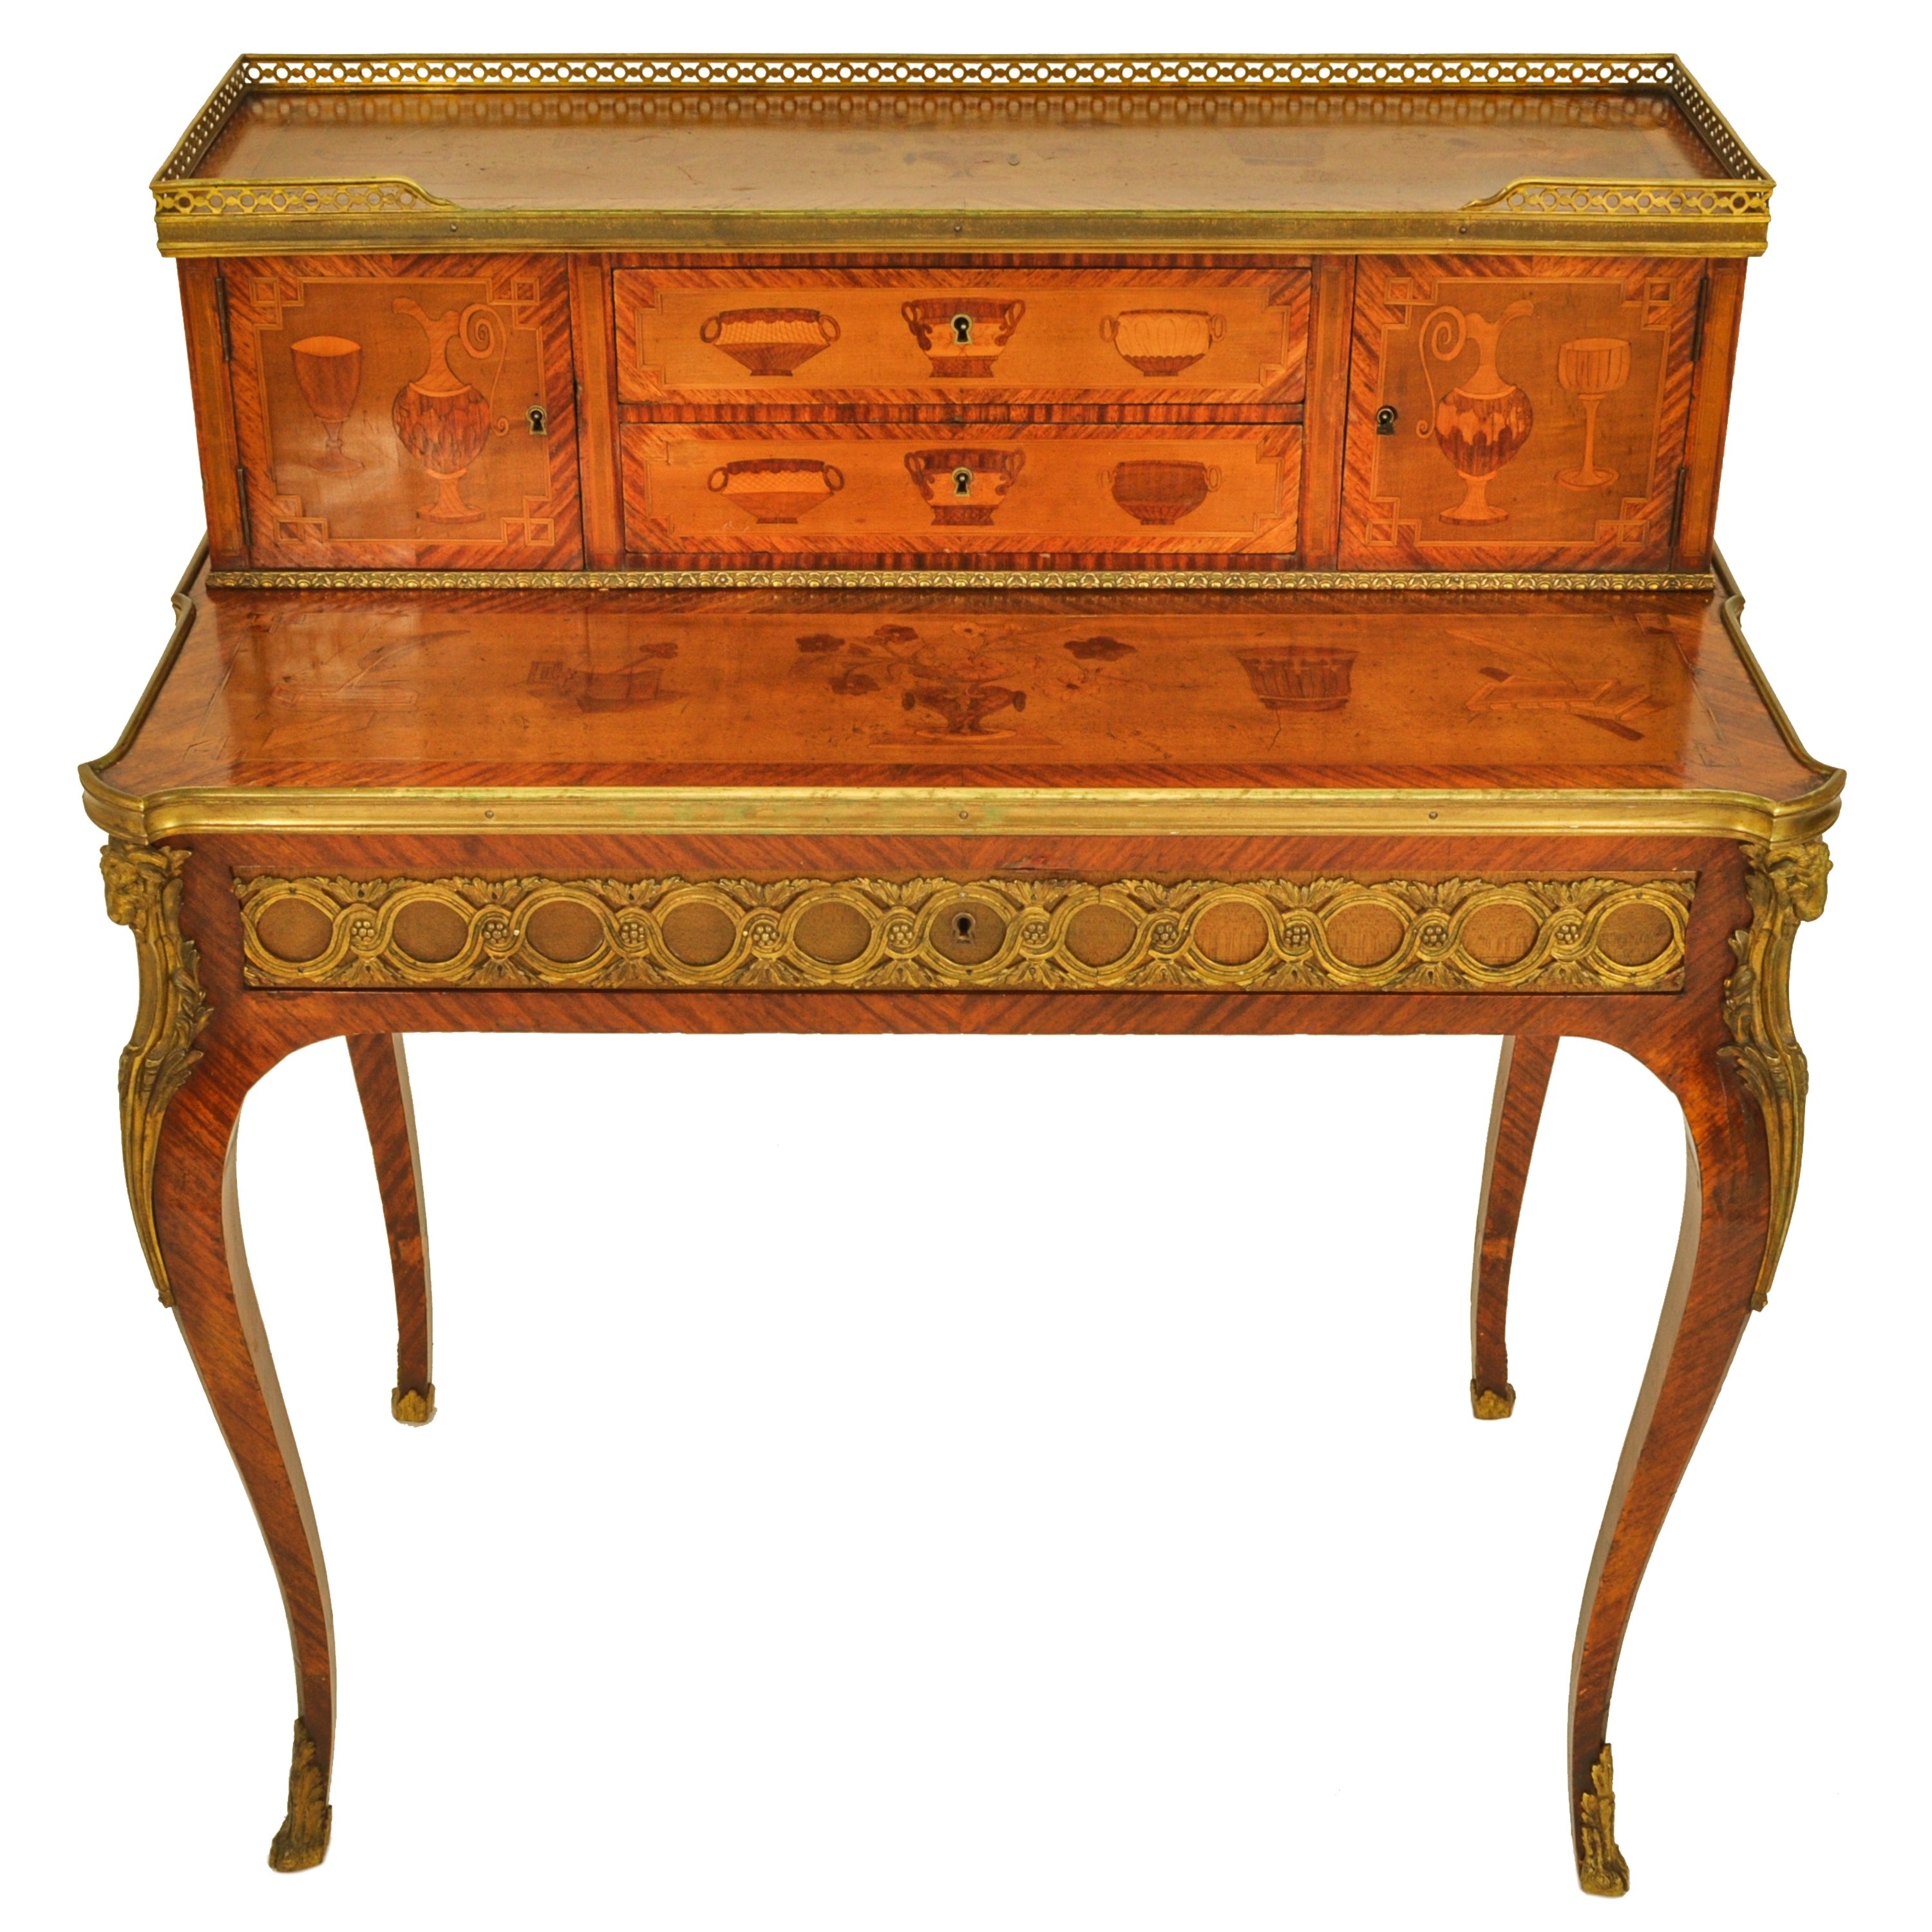 Antique French Louis XV transitional ormolu-mounted tulipwood & marquetry Bonheur Du Jour, Roger Vandercruse (dit Lacroix) , circa 1770.
The desk is finely inlaid on all sides, therefore the desk can 'float' in the middle of a room. The top having